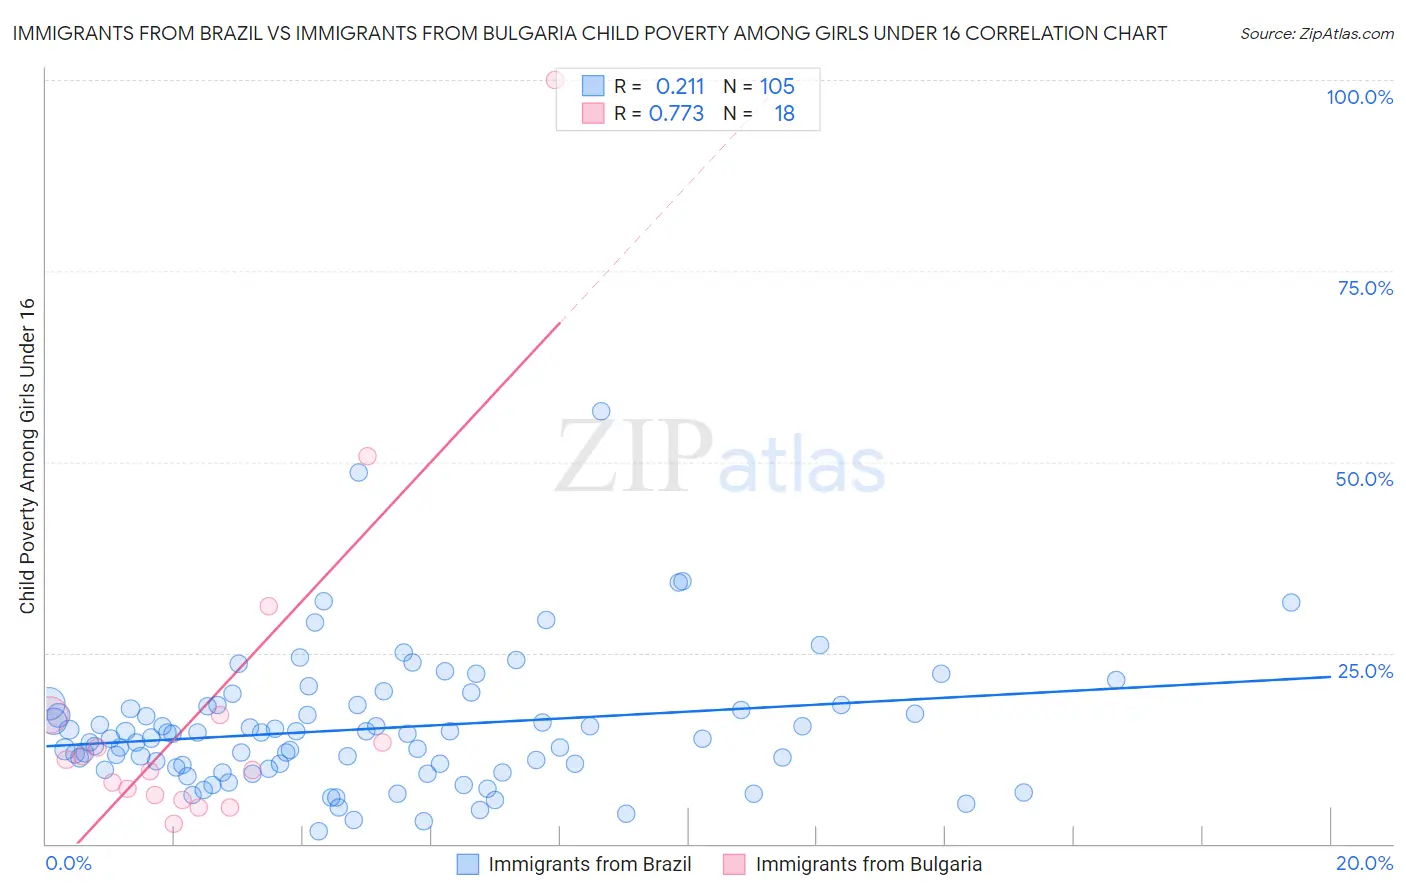 Immigrants from Brazil vs Immigrants from Bulgaria Child Poverty Among Girls Under 16